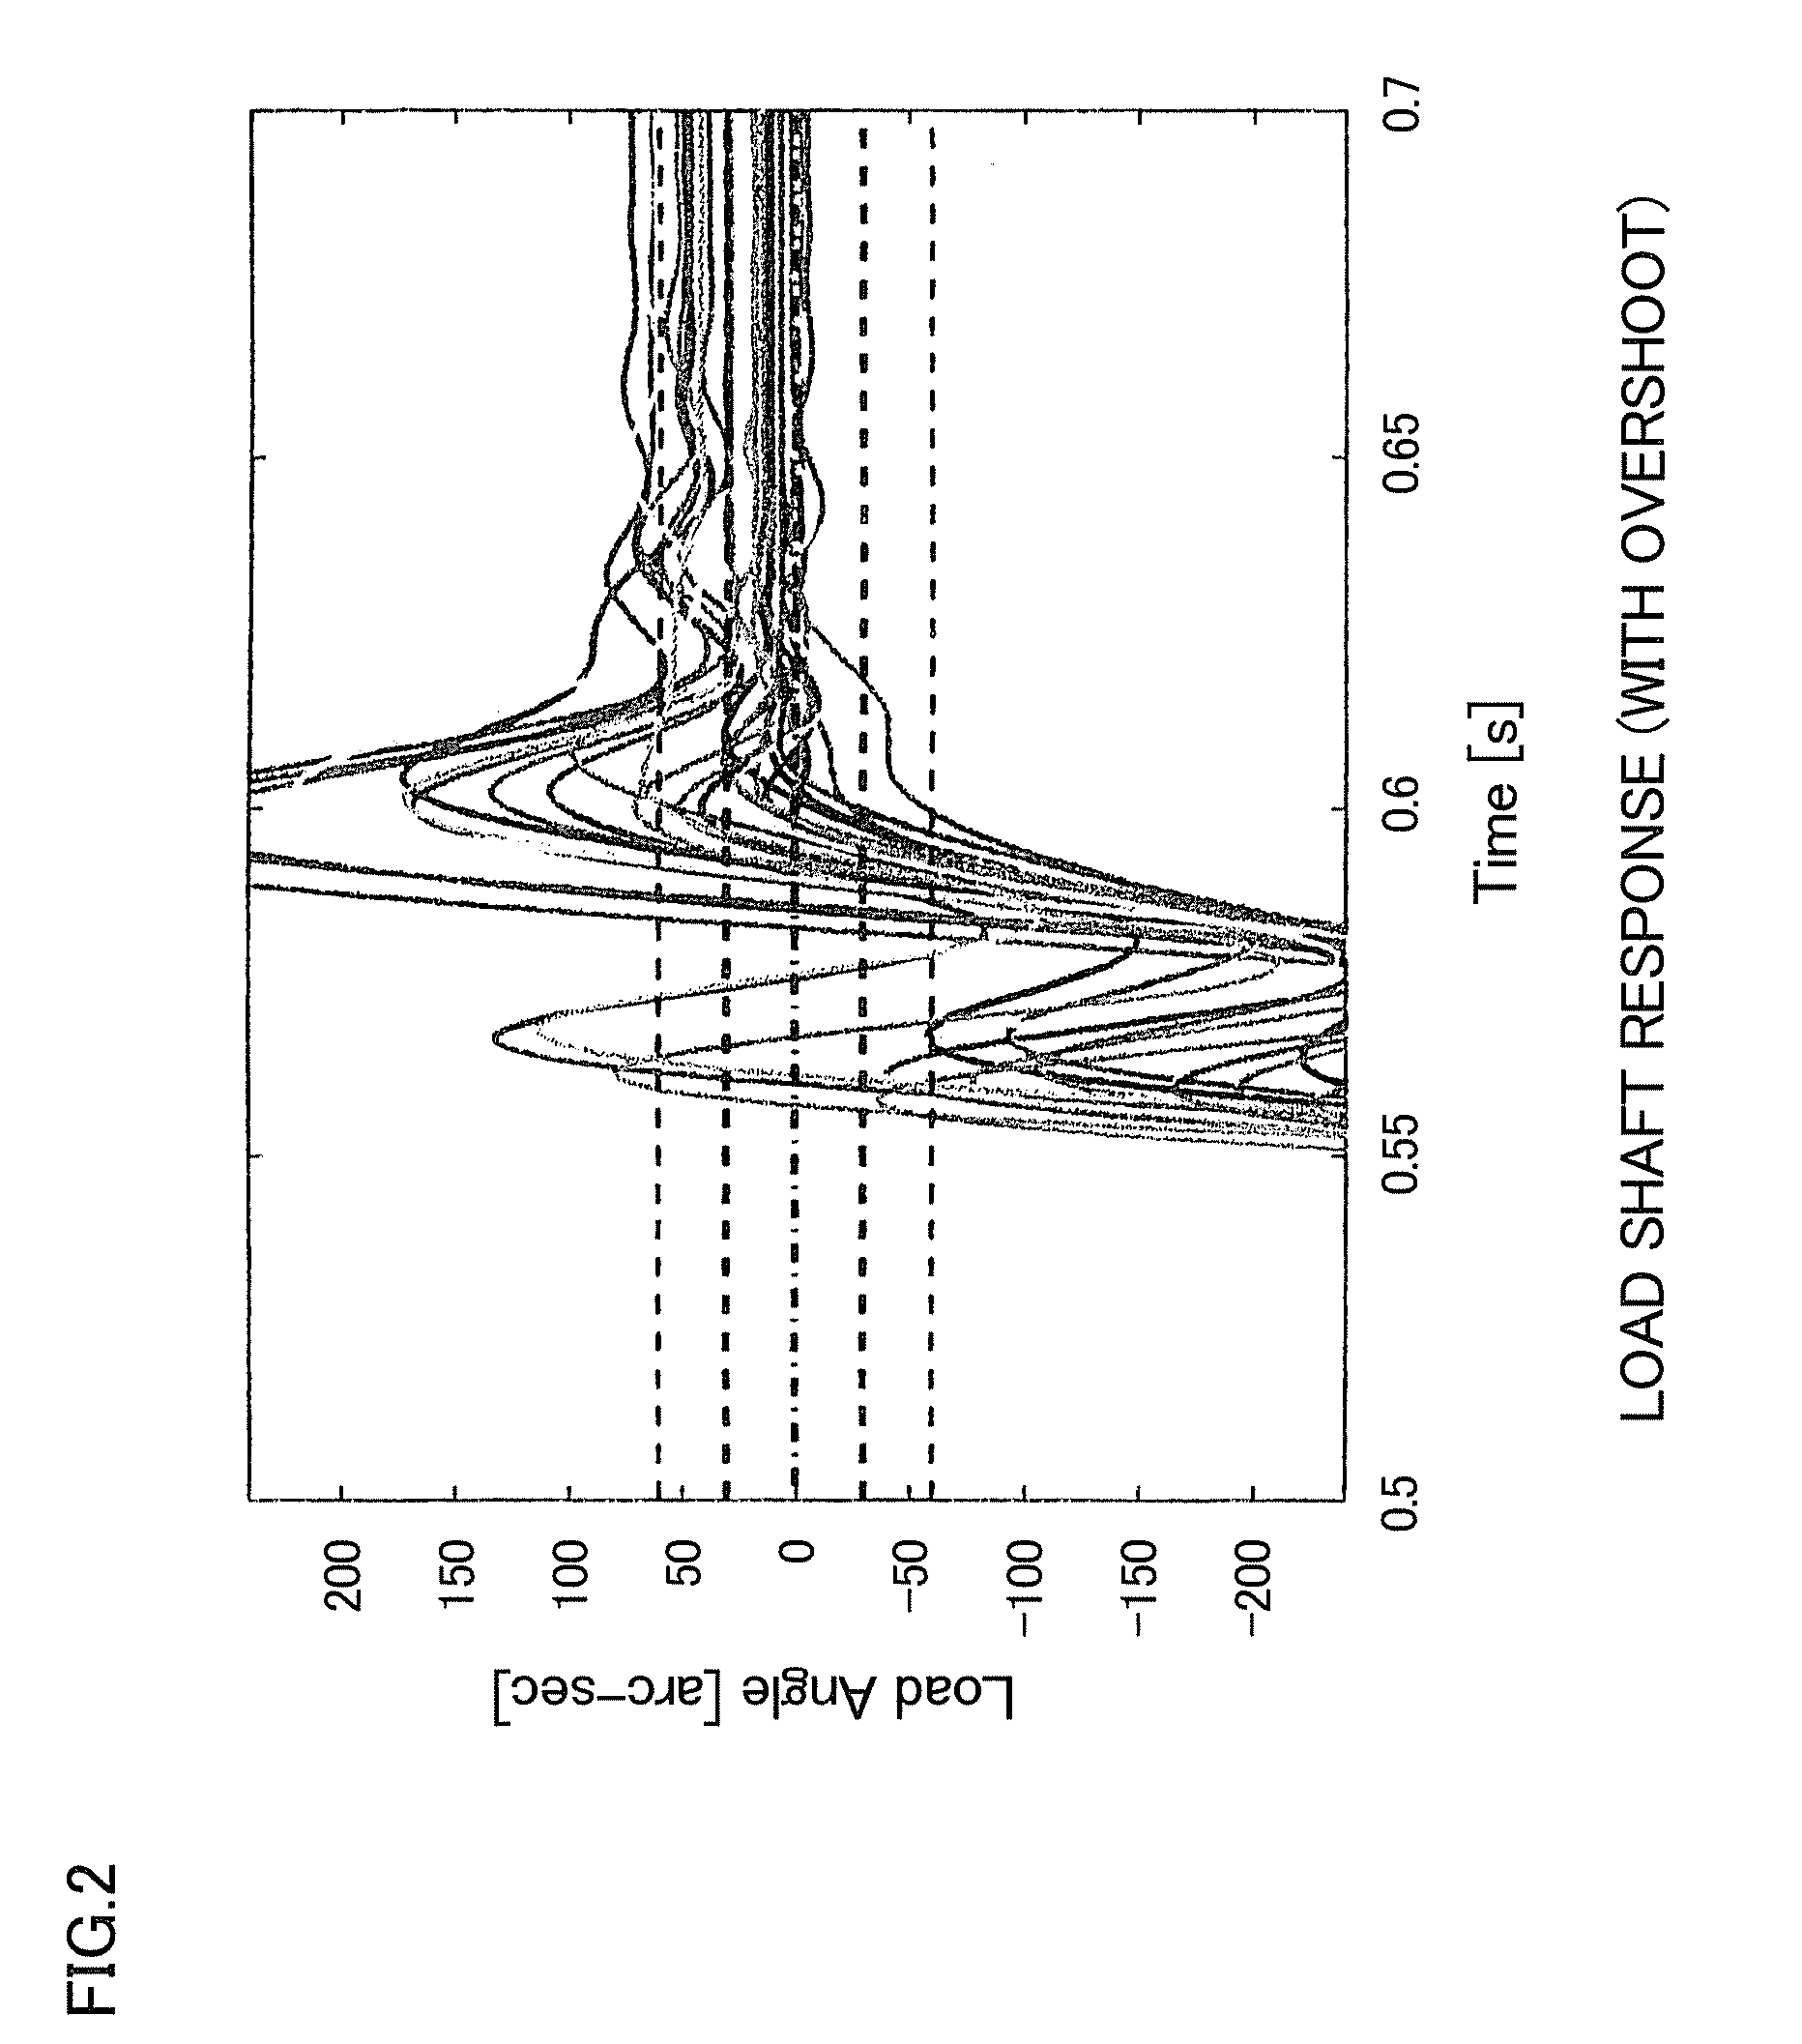 Method for compensating for angular transmission error of an actuator